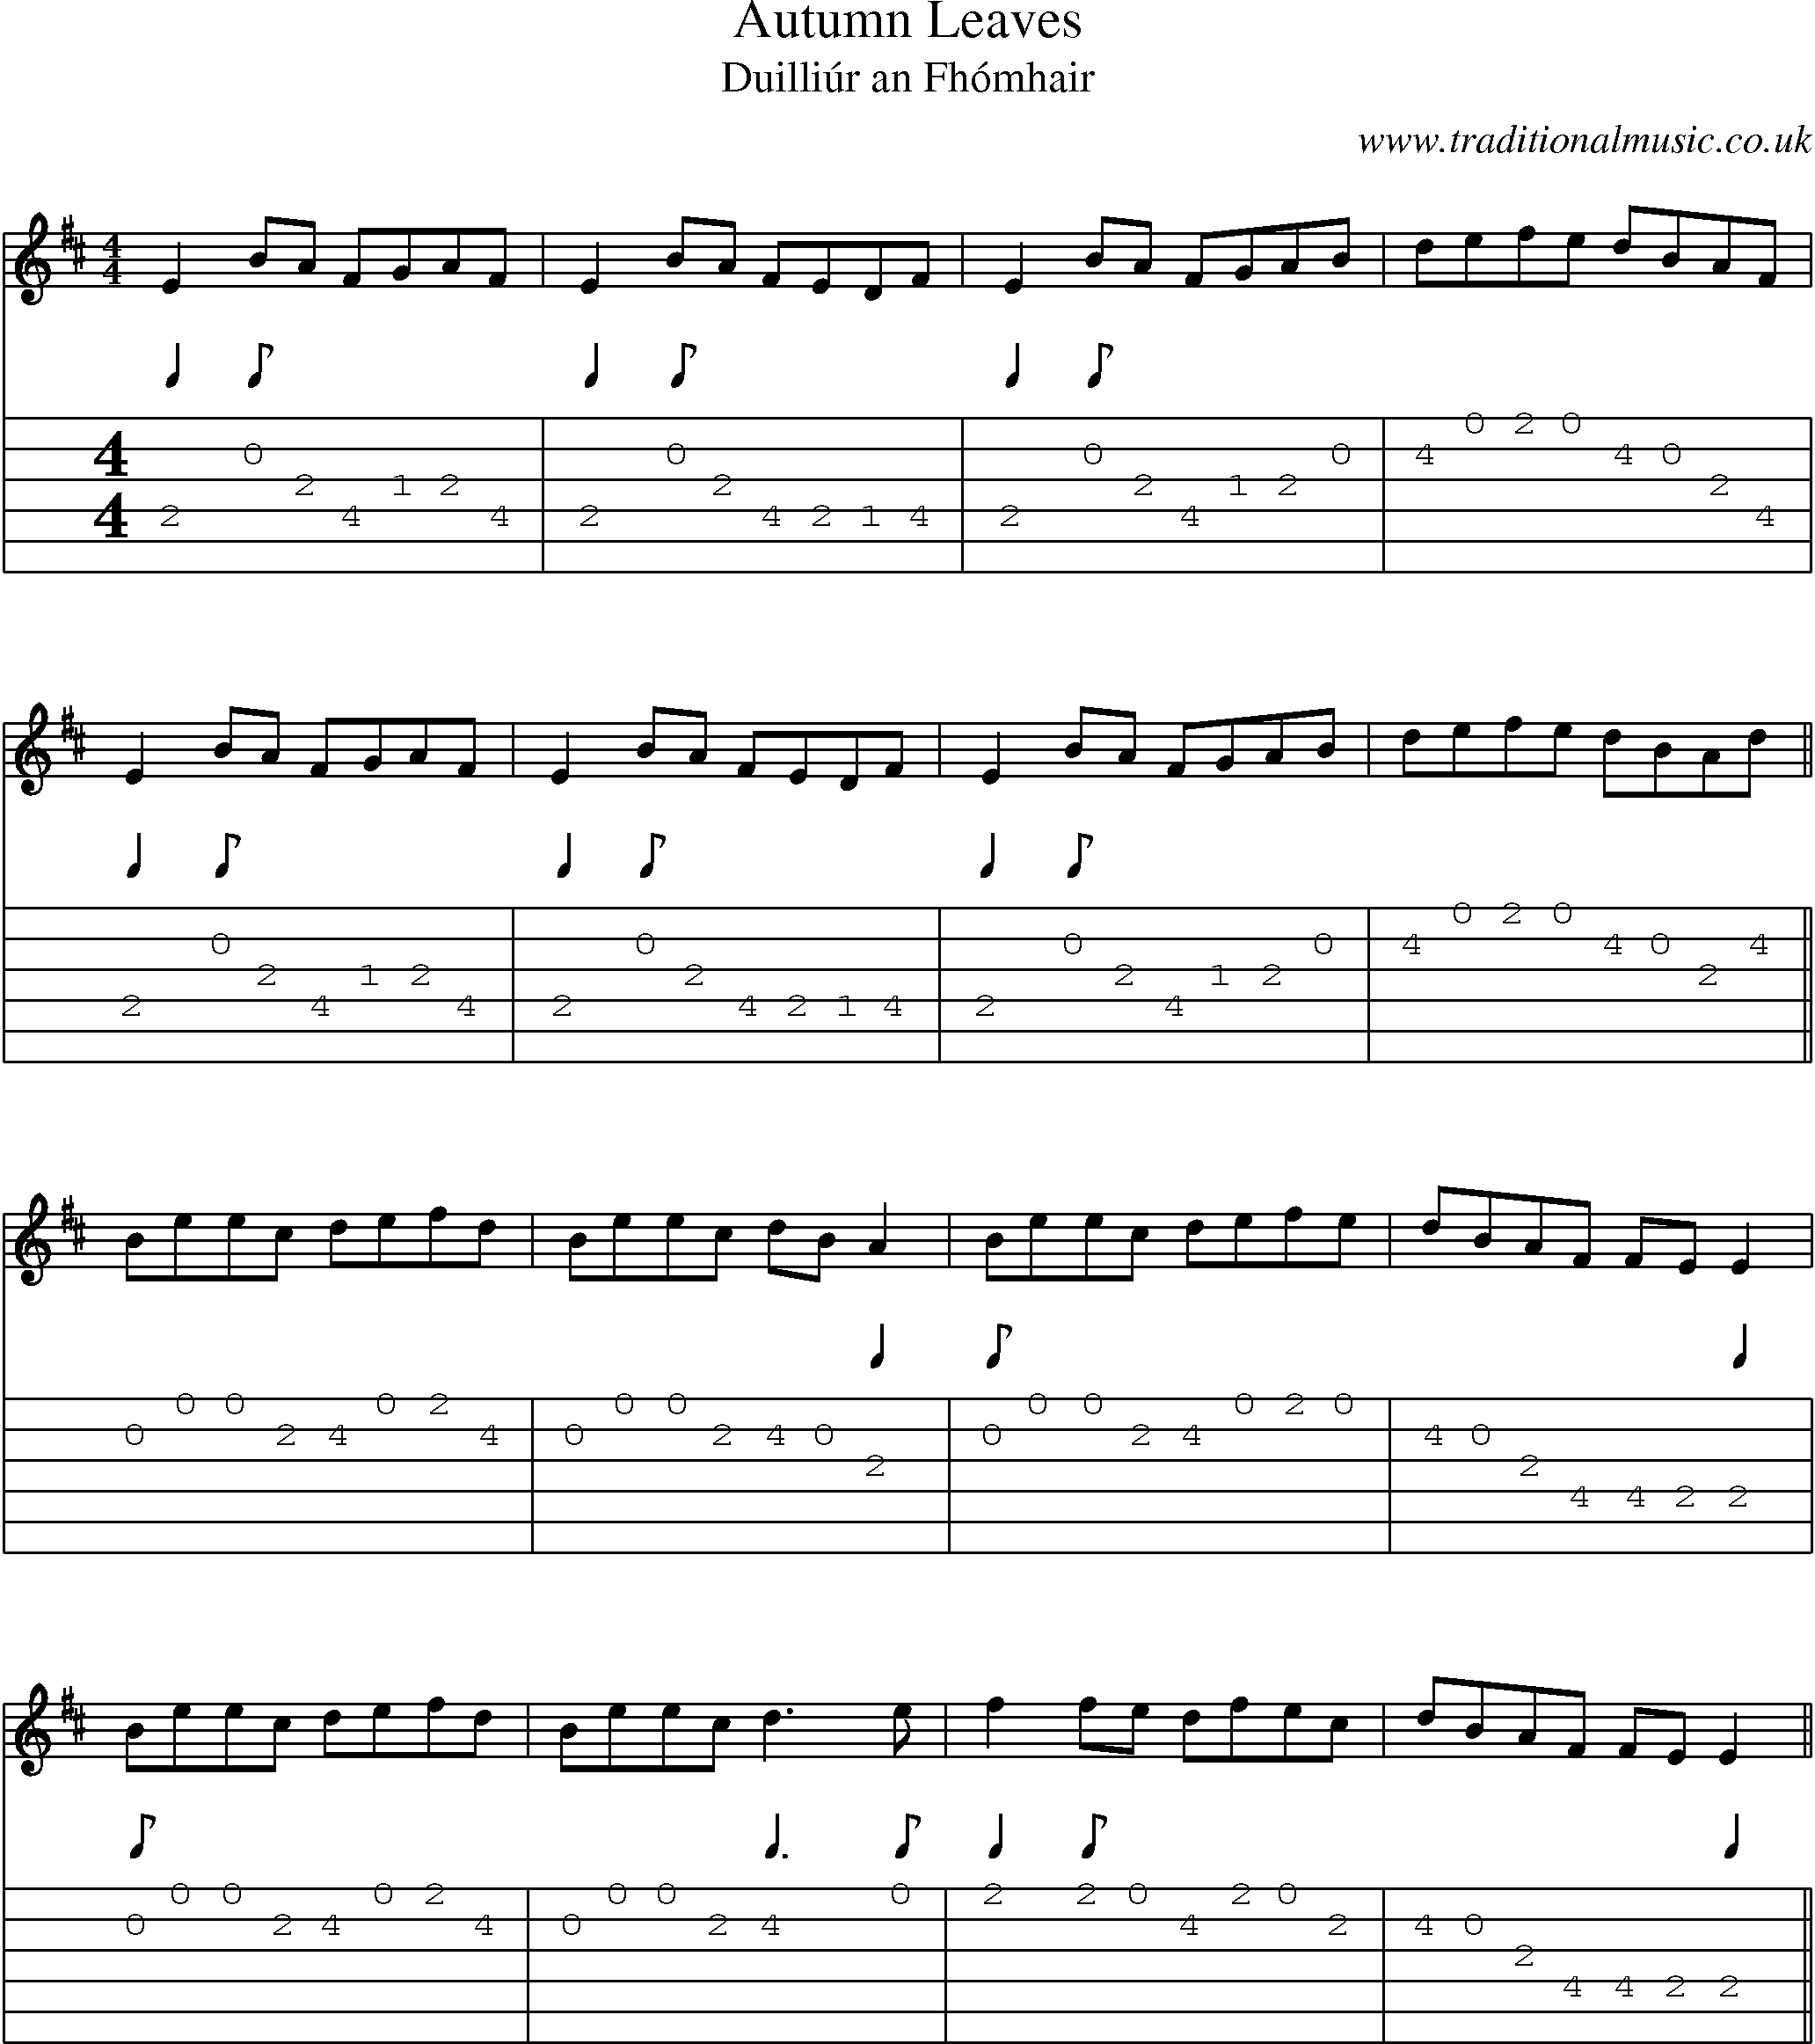 Music Score and Guitar Tabs for Autumn Leaves